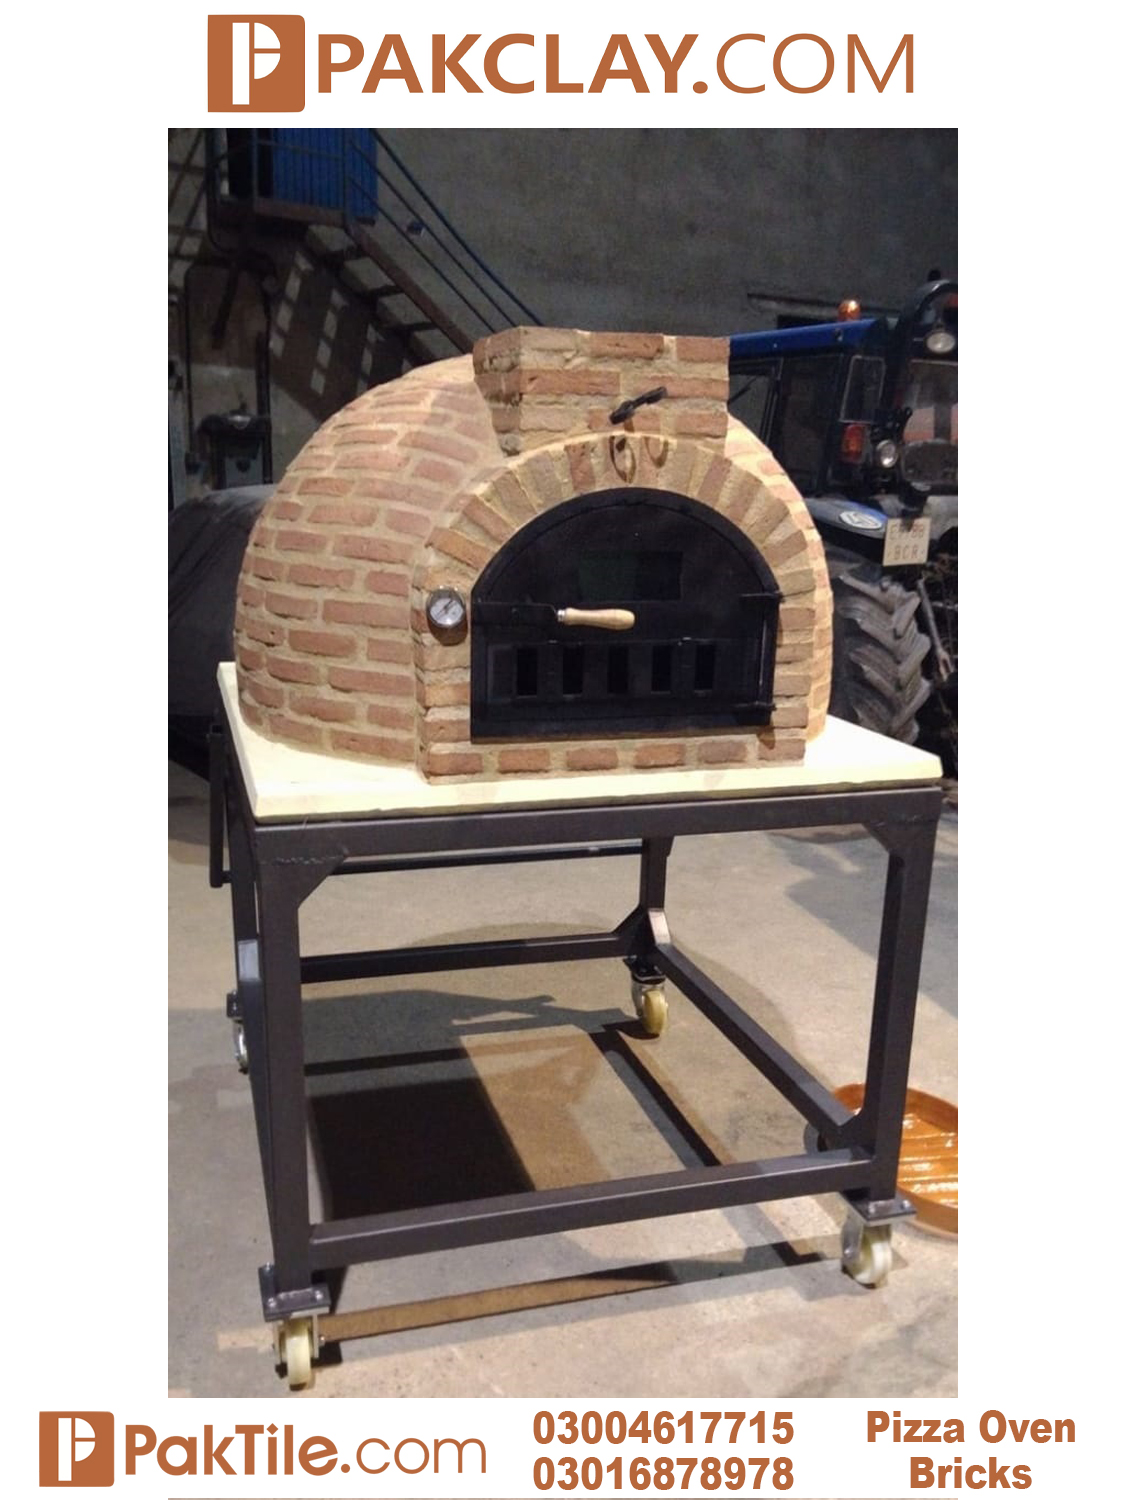 1 Wood pizza oven price in pakistan